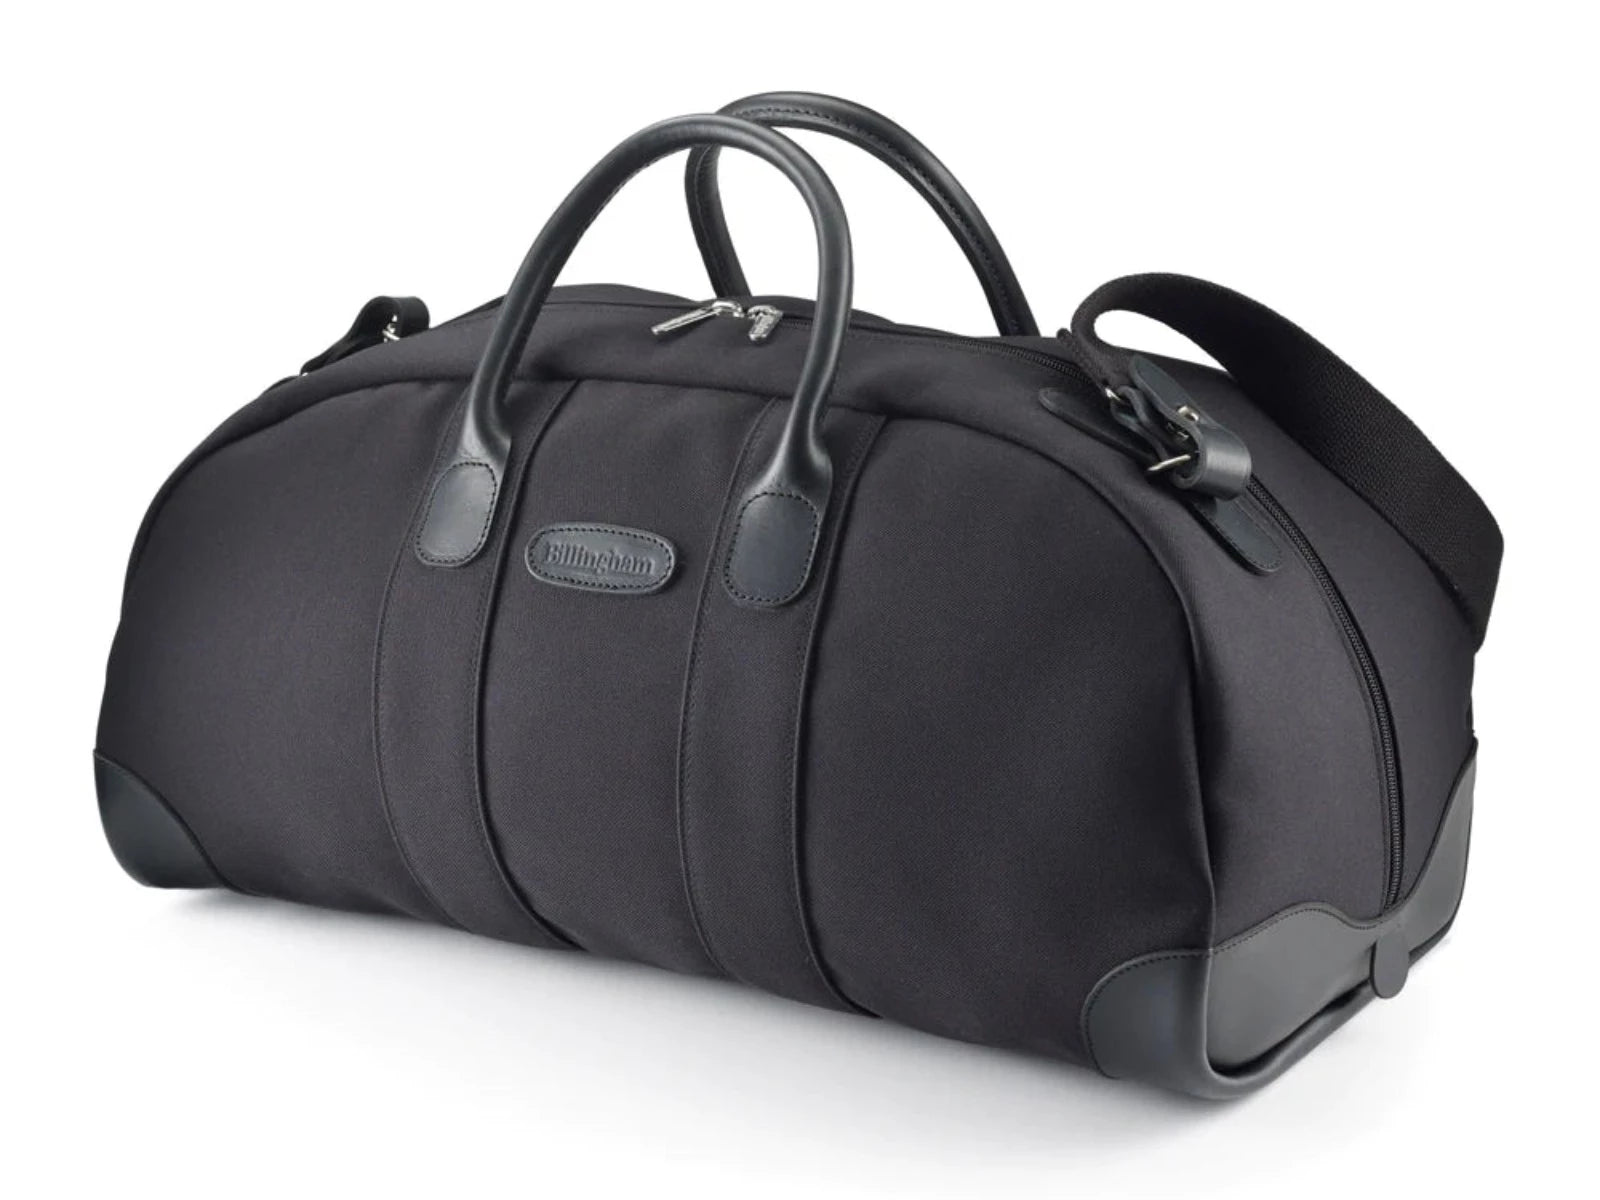 Travel bag weekender size in Black from Great British travelware experts Billingham, featuring waterproof composition, real grain leather, brass fittings and 5-year guarantee. This bag is designed for supreme comfort as well as elegance of design